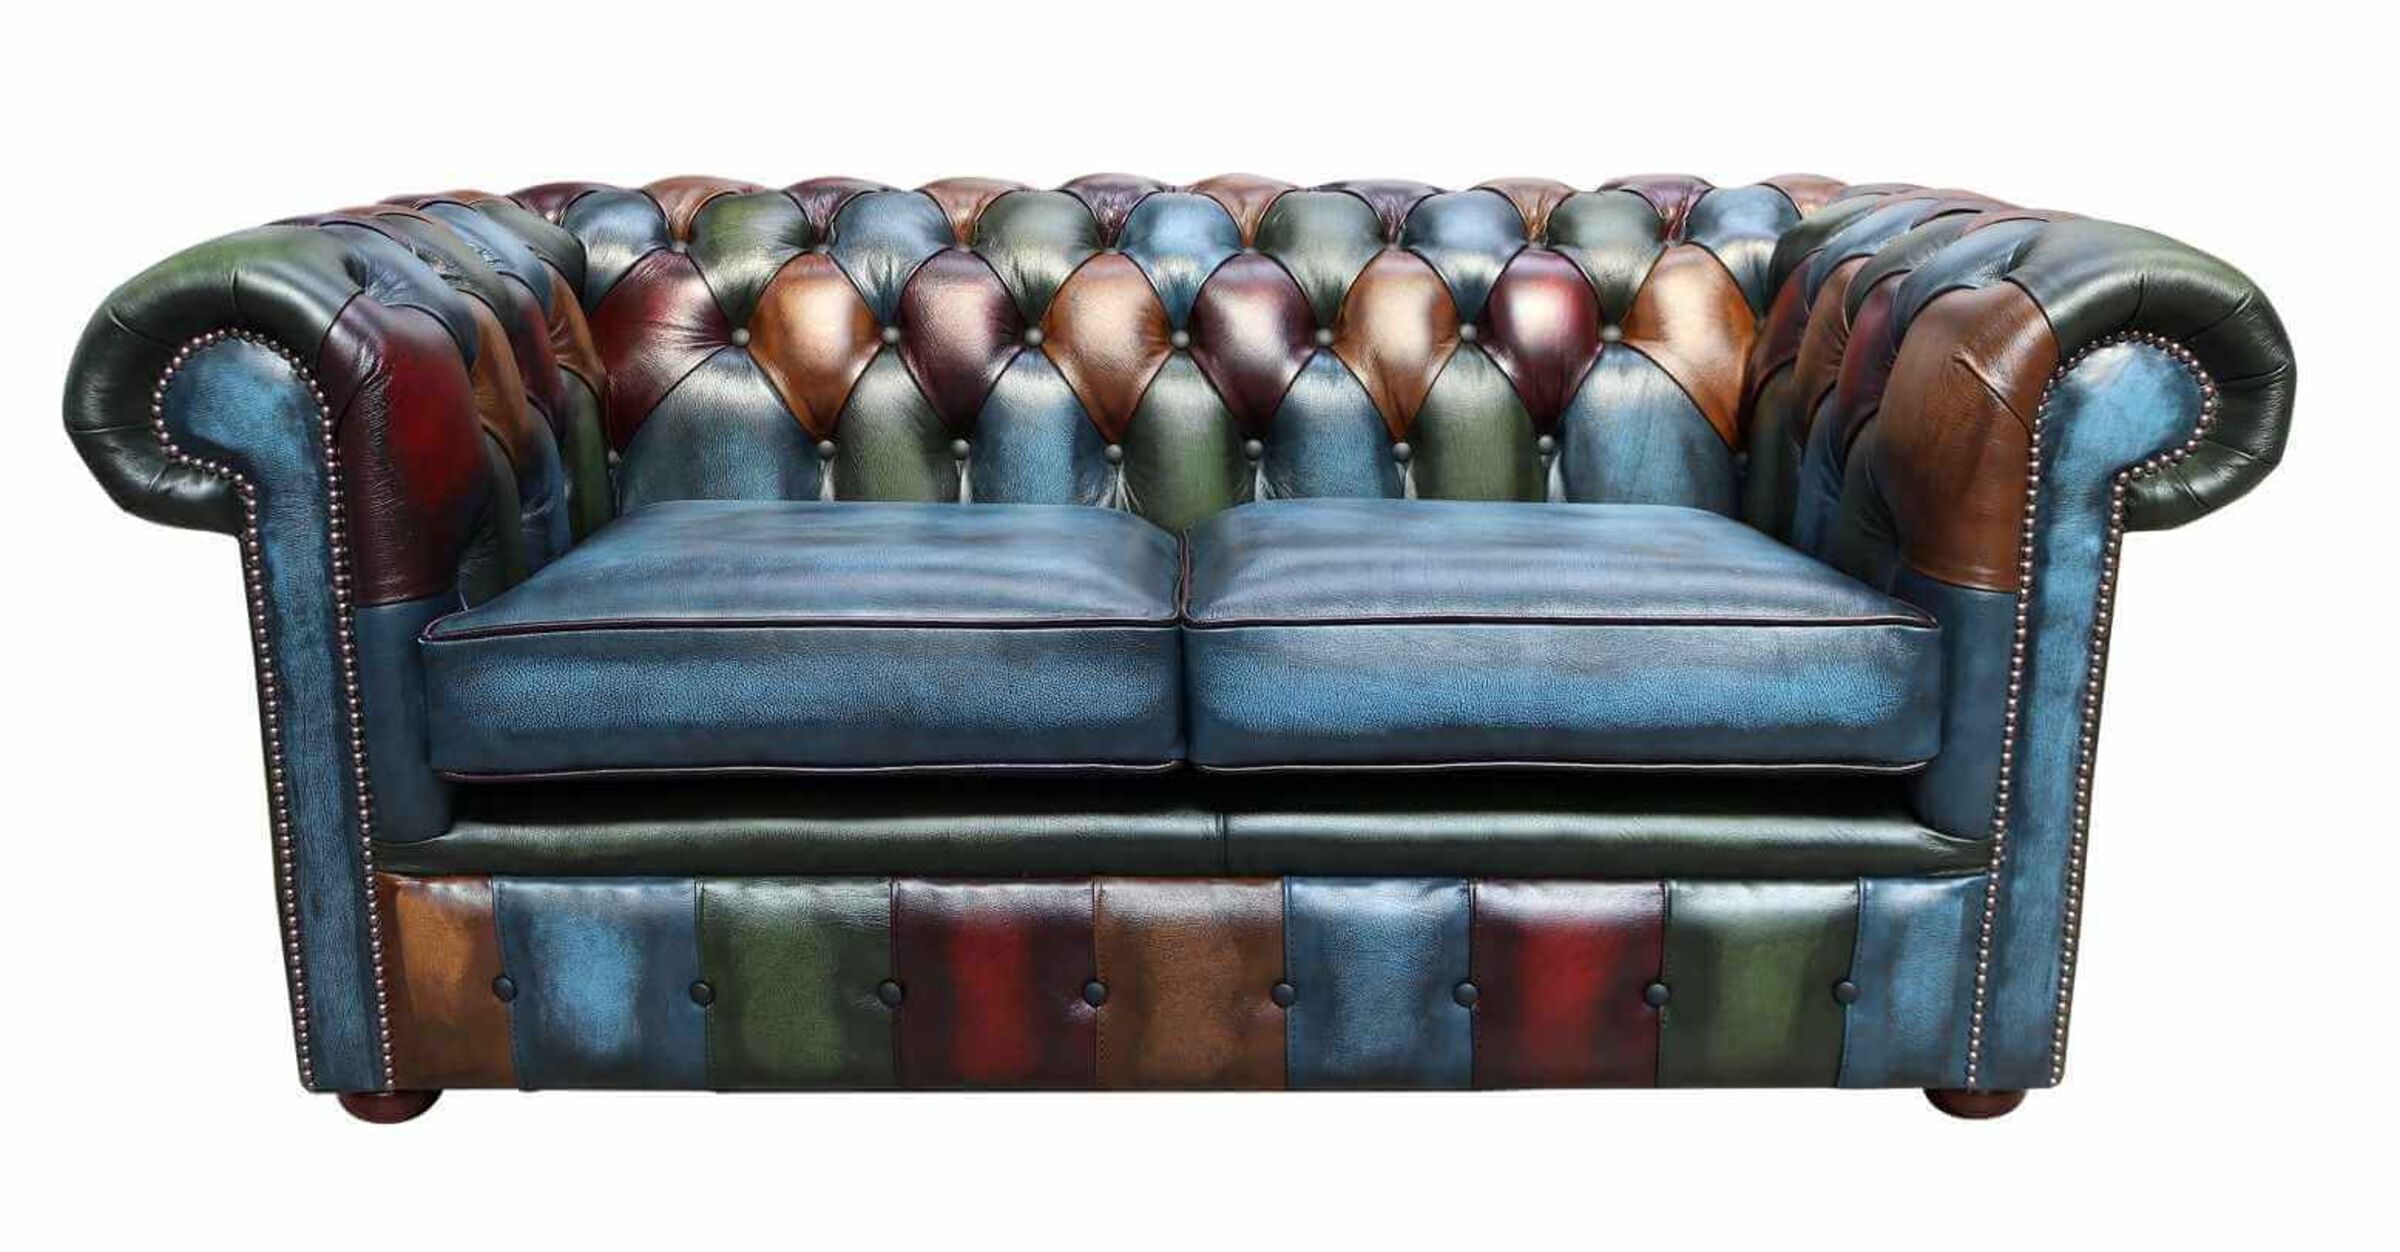 Chesterfield Patchwork 2 Seater Settee, Patchwork Leather Chesterfield Sofa